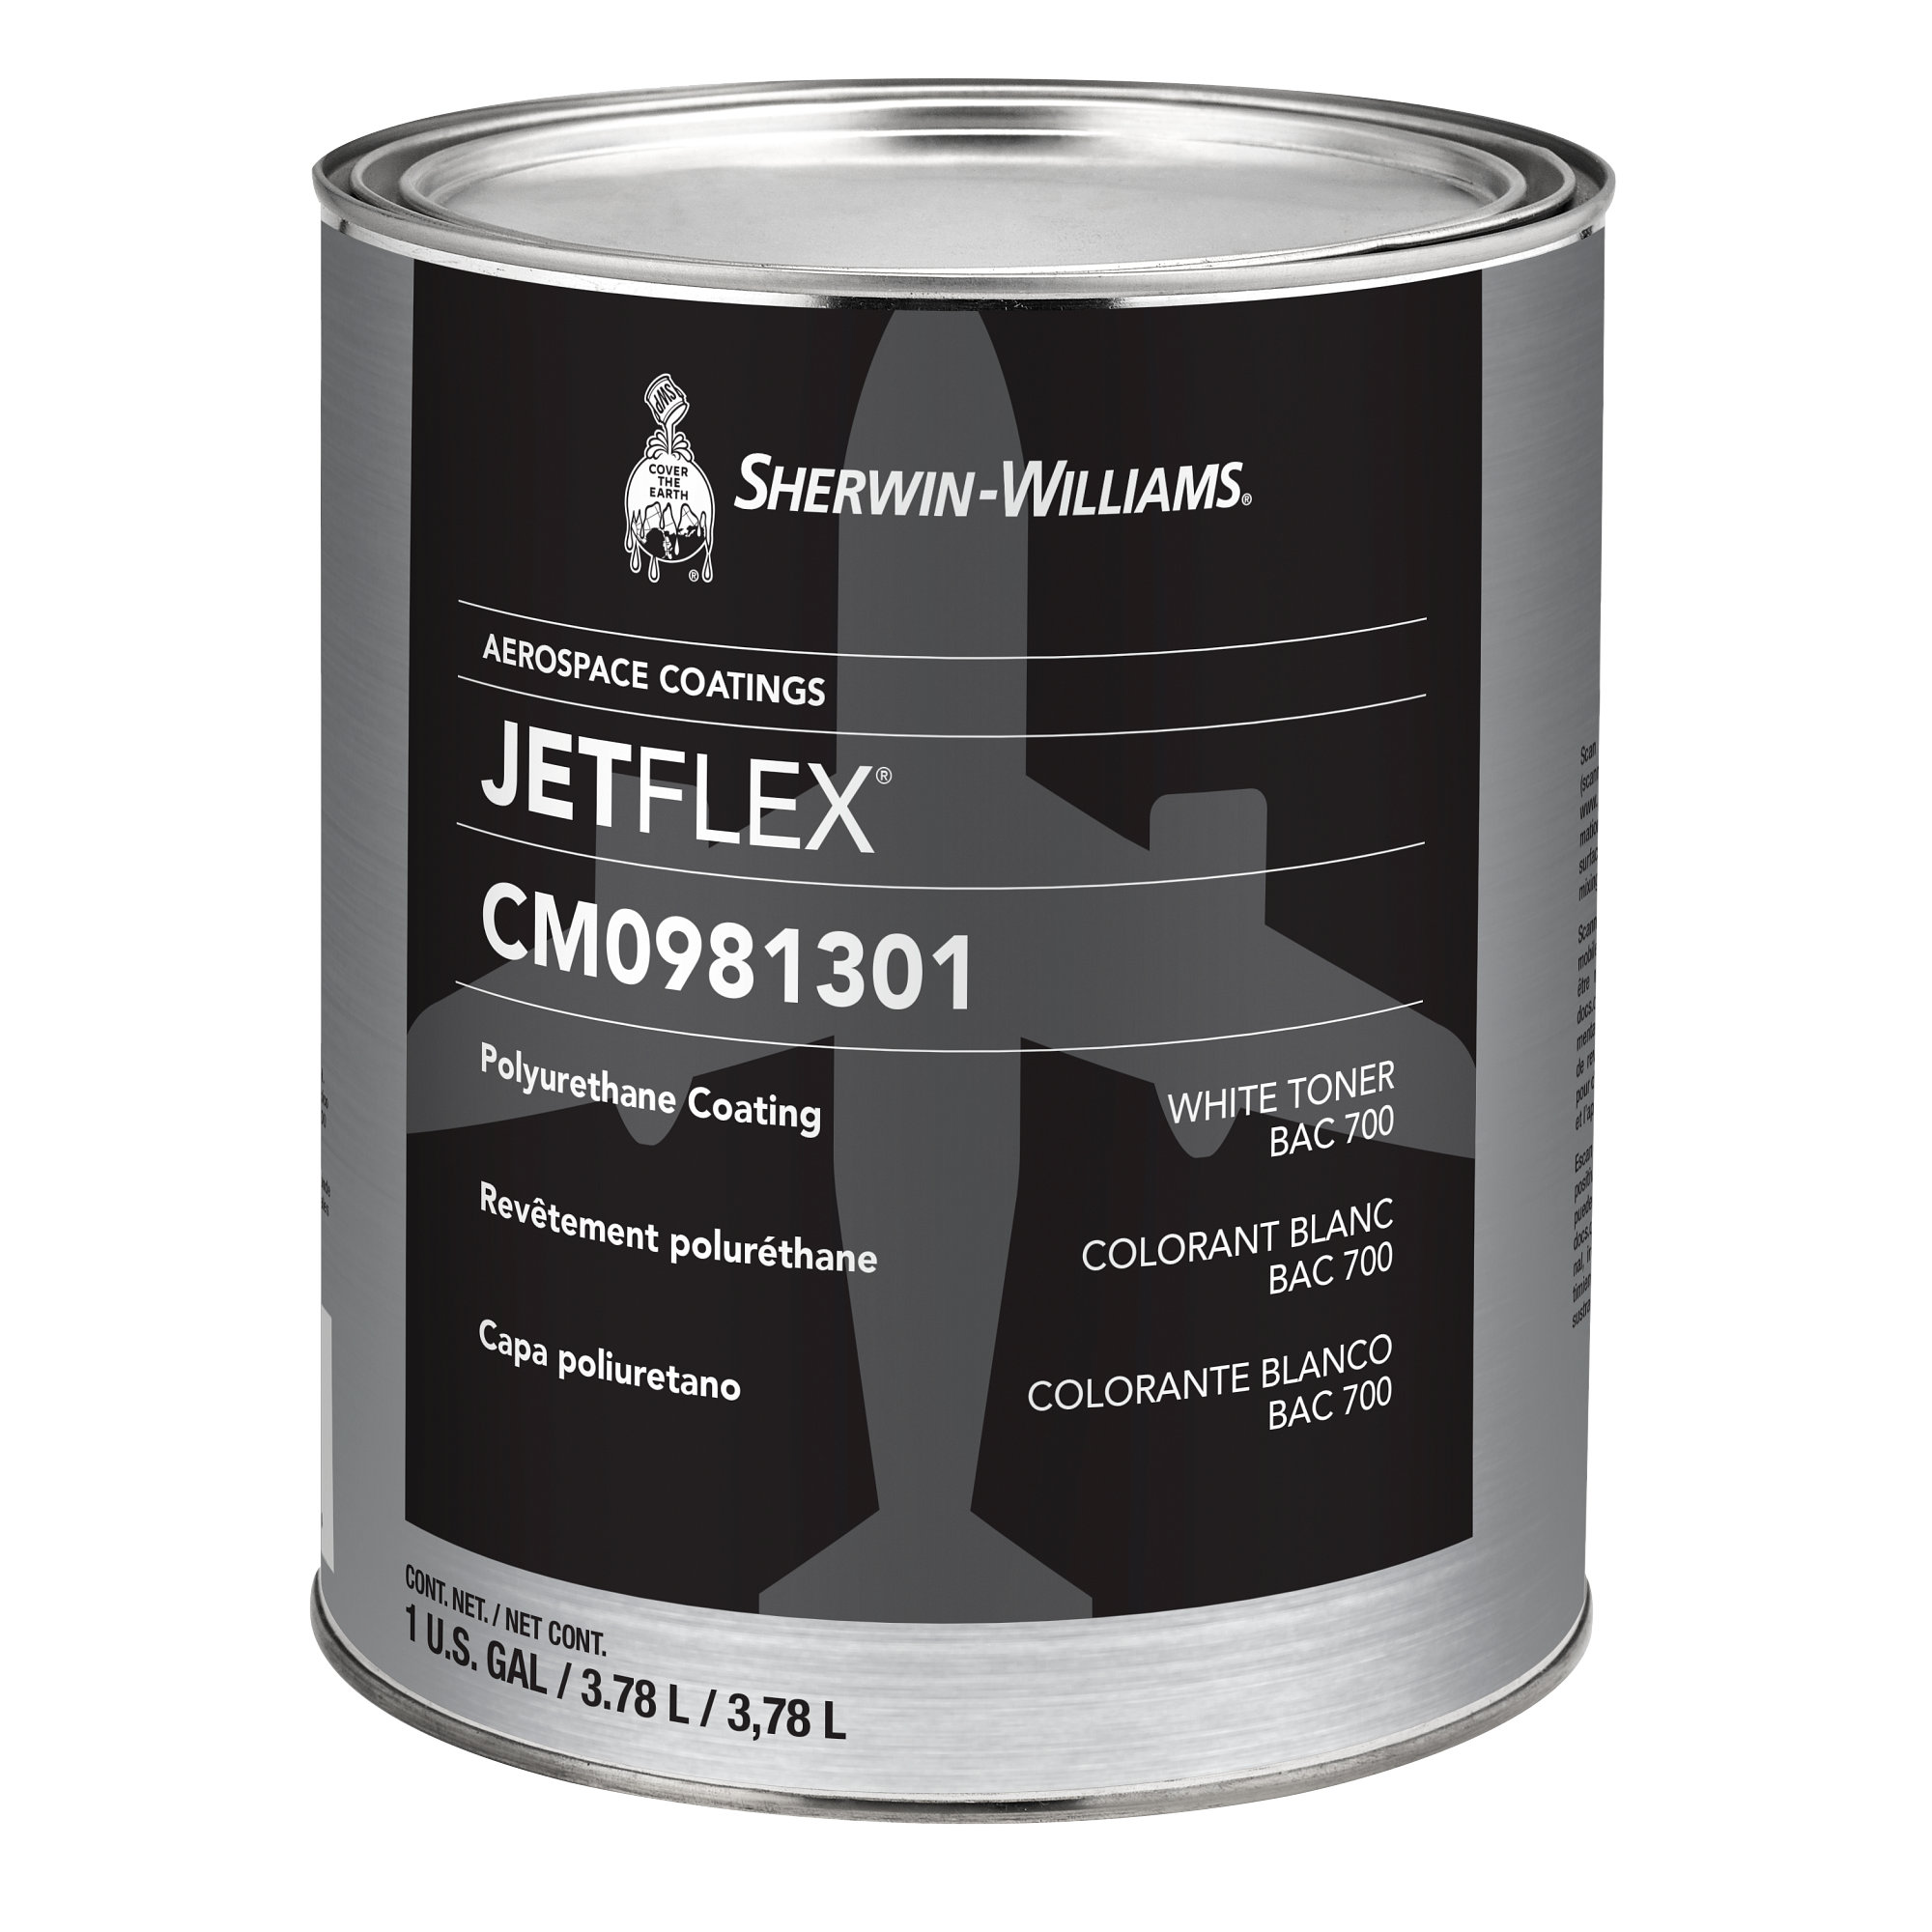 https://s7d2.scene7.com/is/image/sherwinwilliams/CM0981301-A-1GAL_Rnd?fit=constrain,1&wid=2000